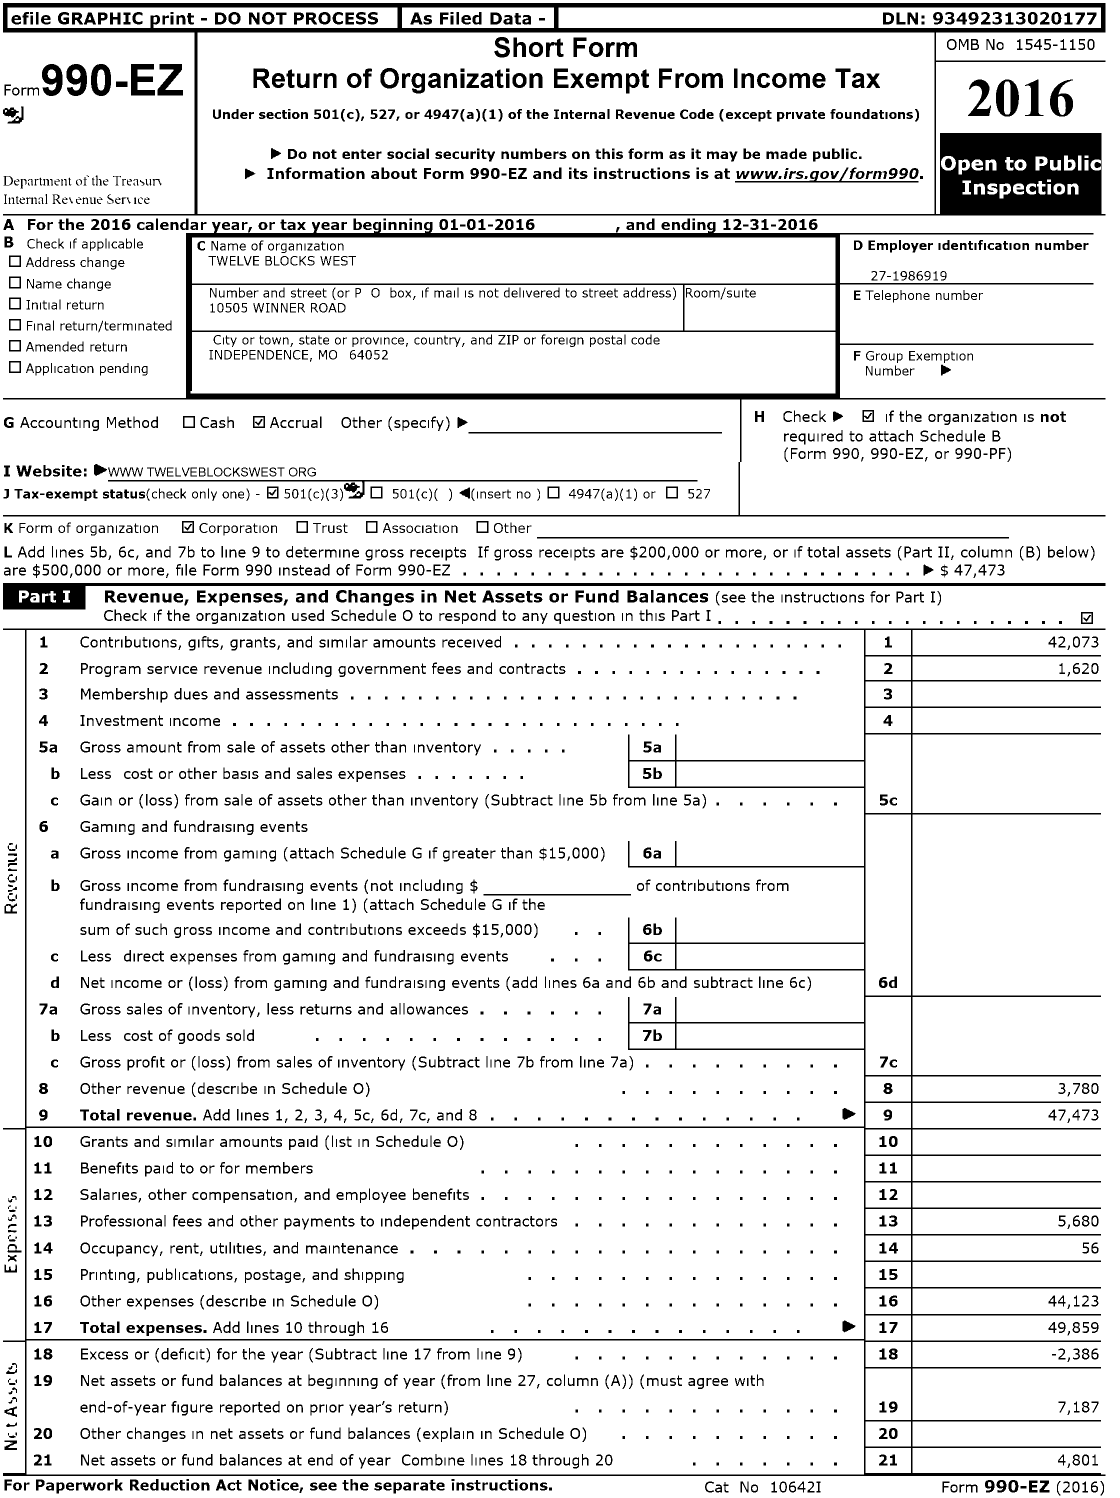 Image of first page of 2016 Form 990EZ for Twelve Blocks West